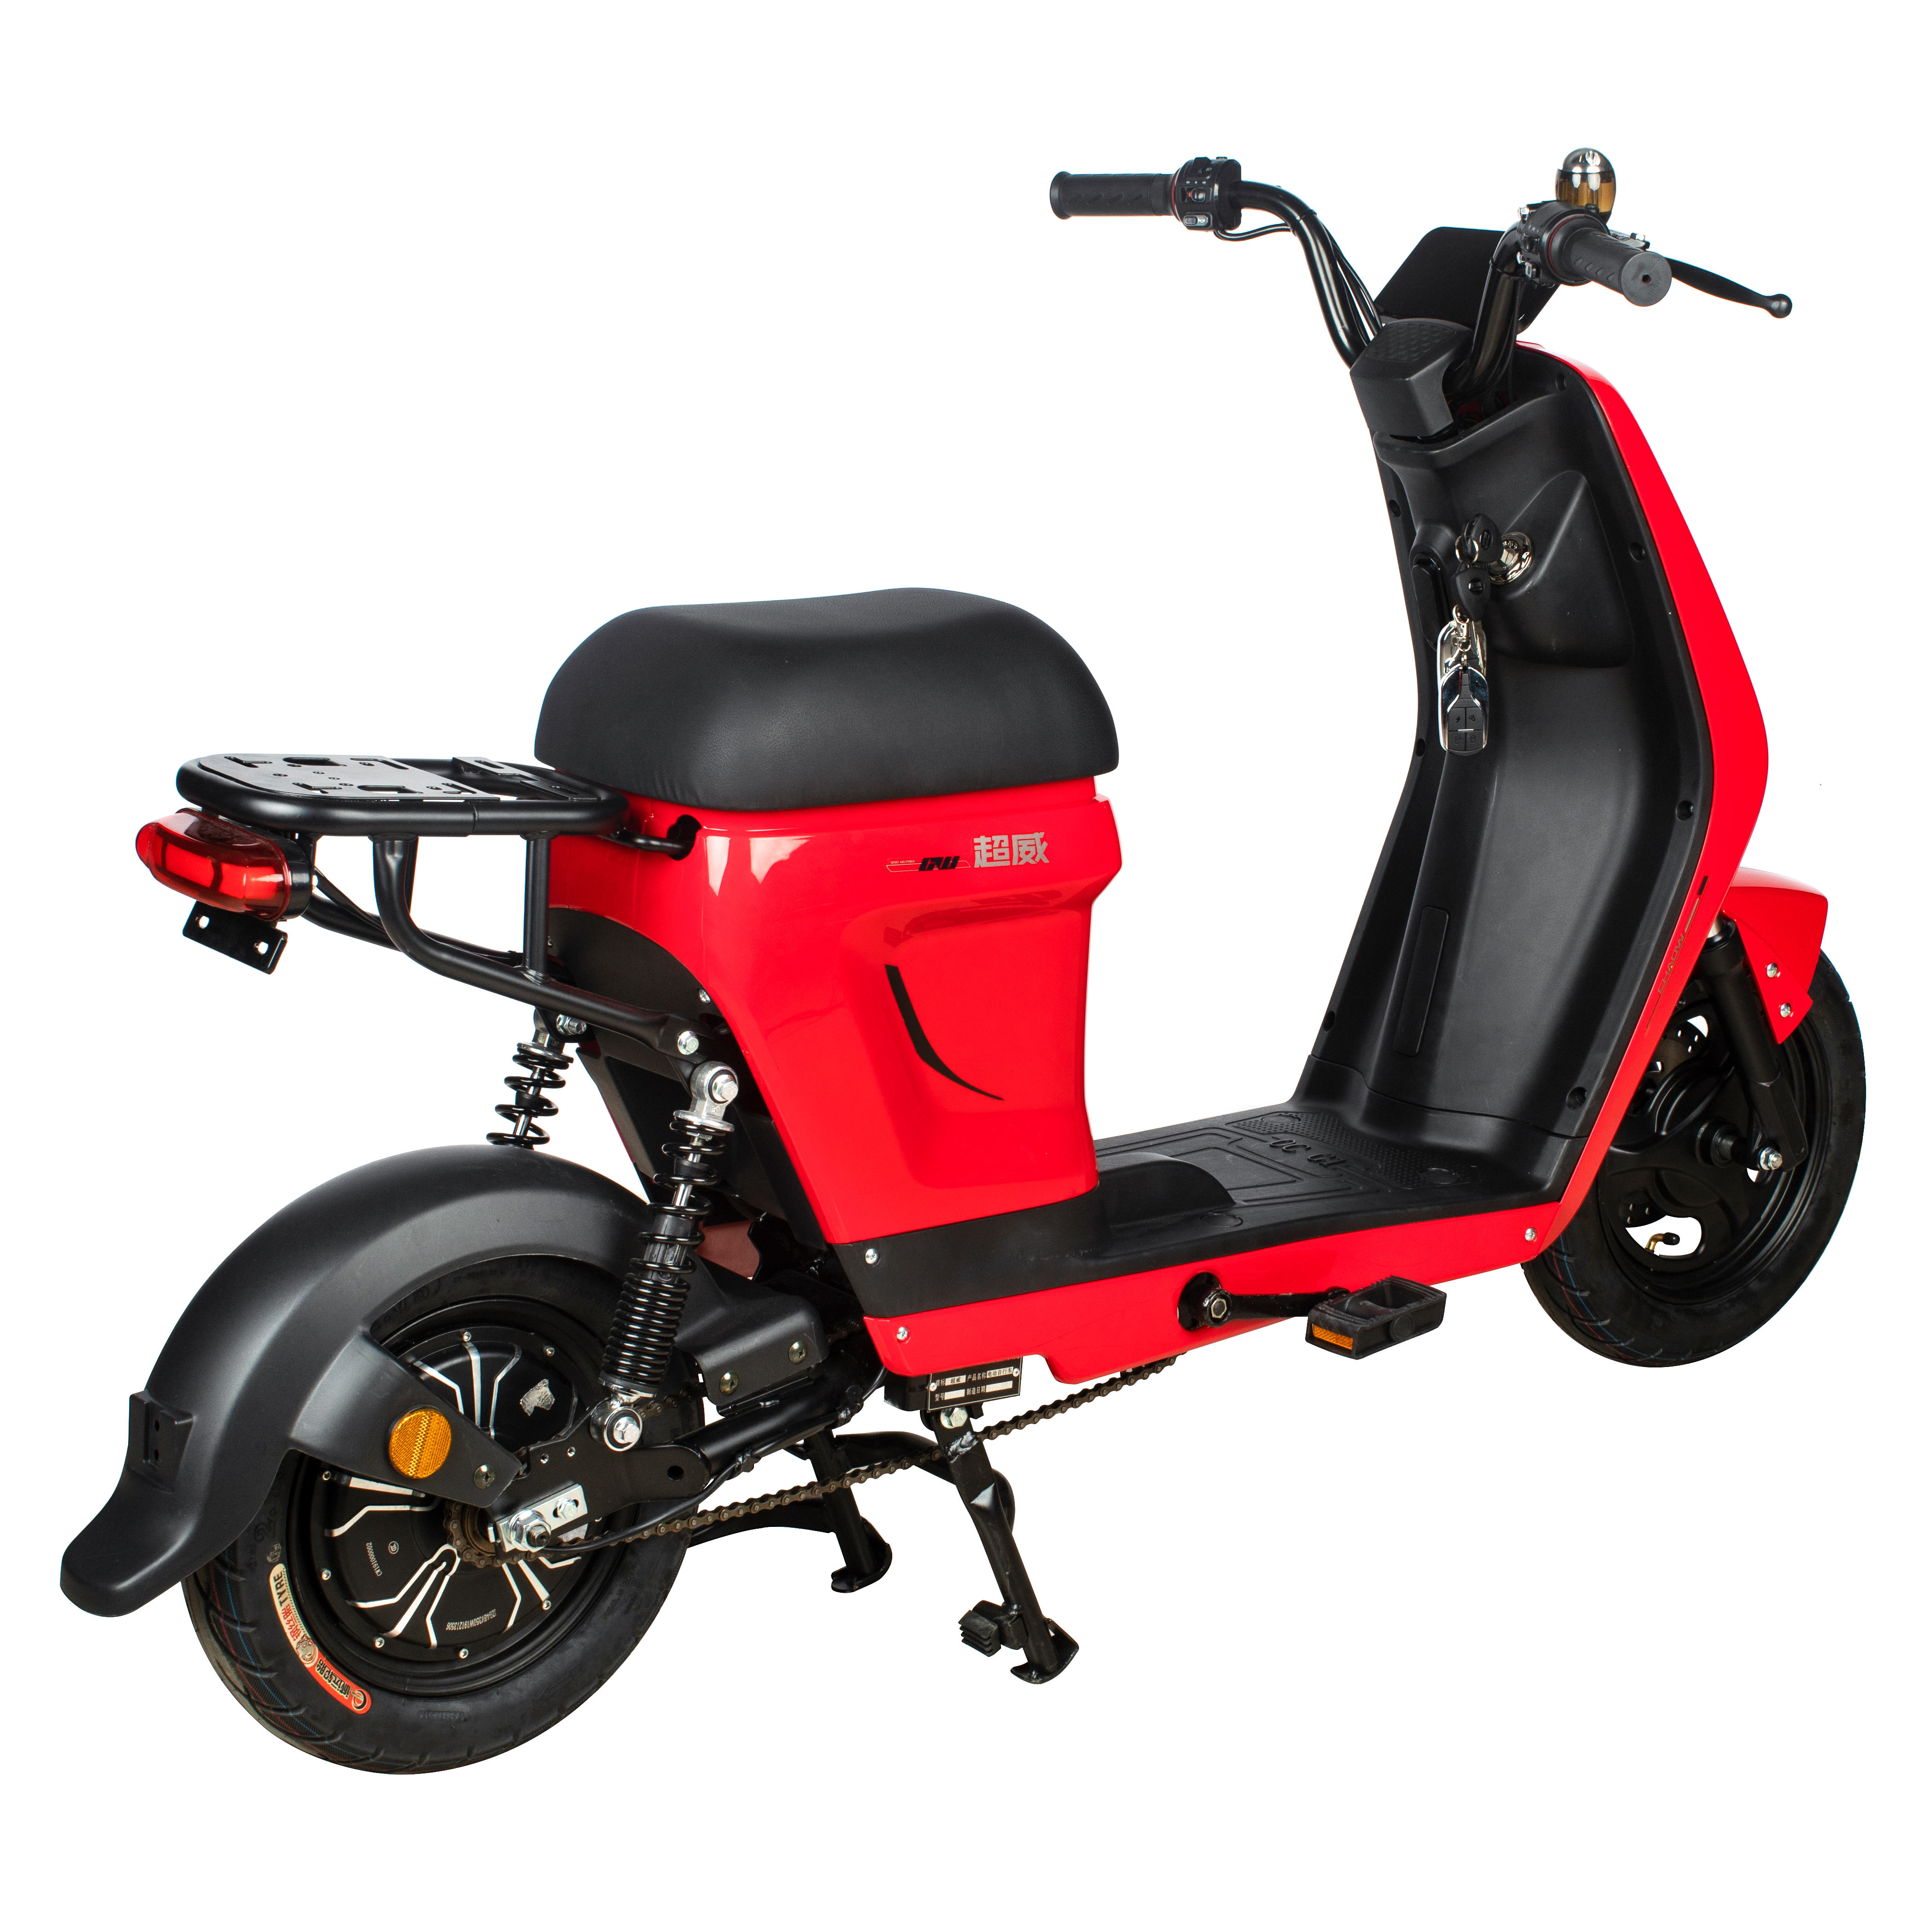 48V LITHIUM REMOVABLE BATTERY 800W MINI ELECTRIC SCOOTER (F-36)